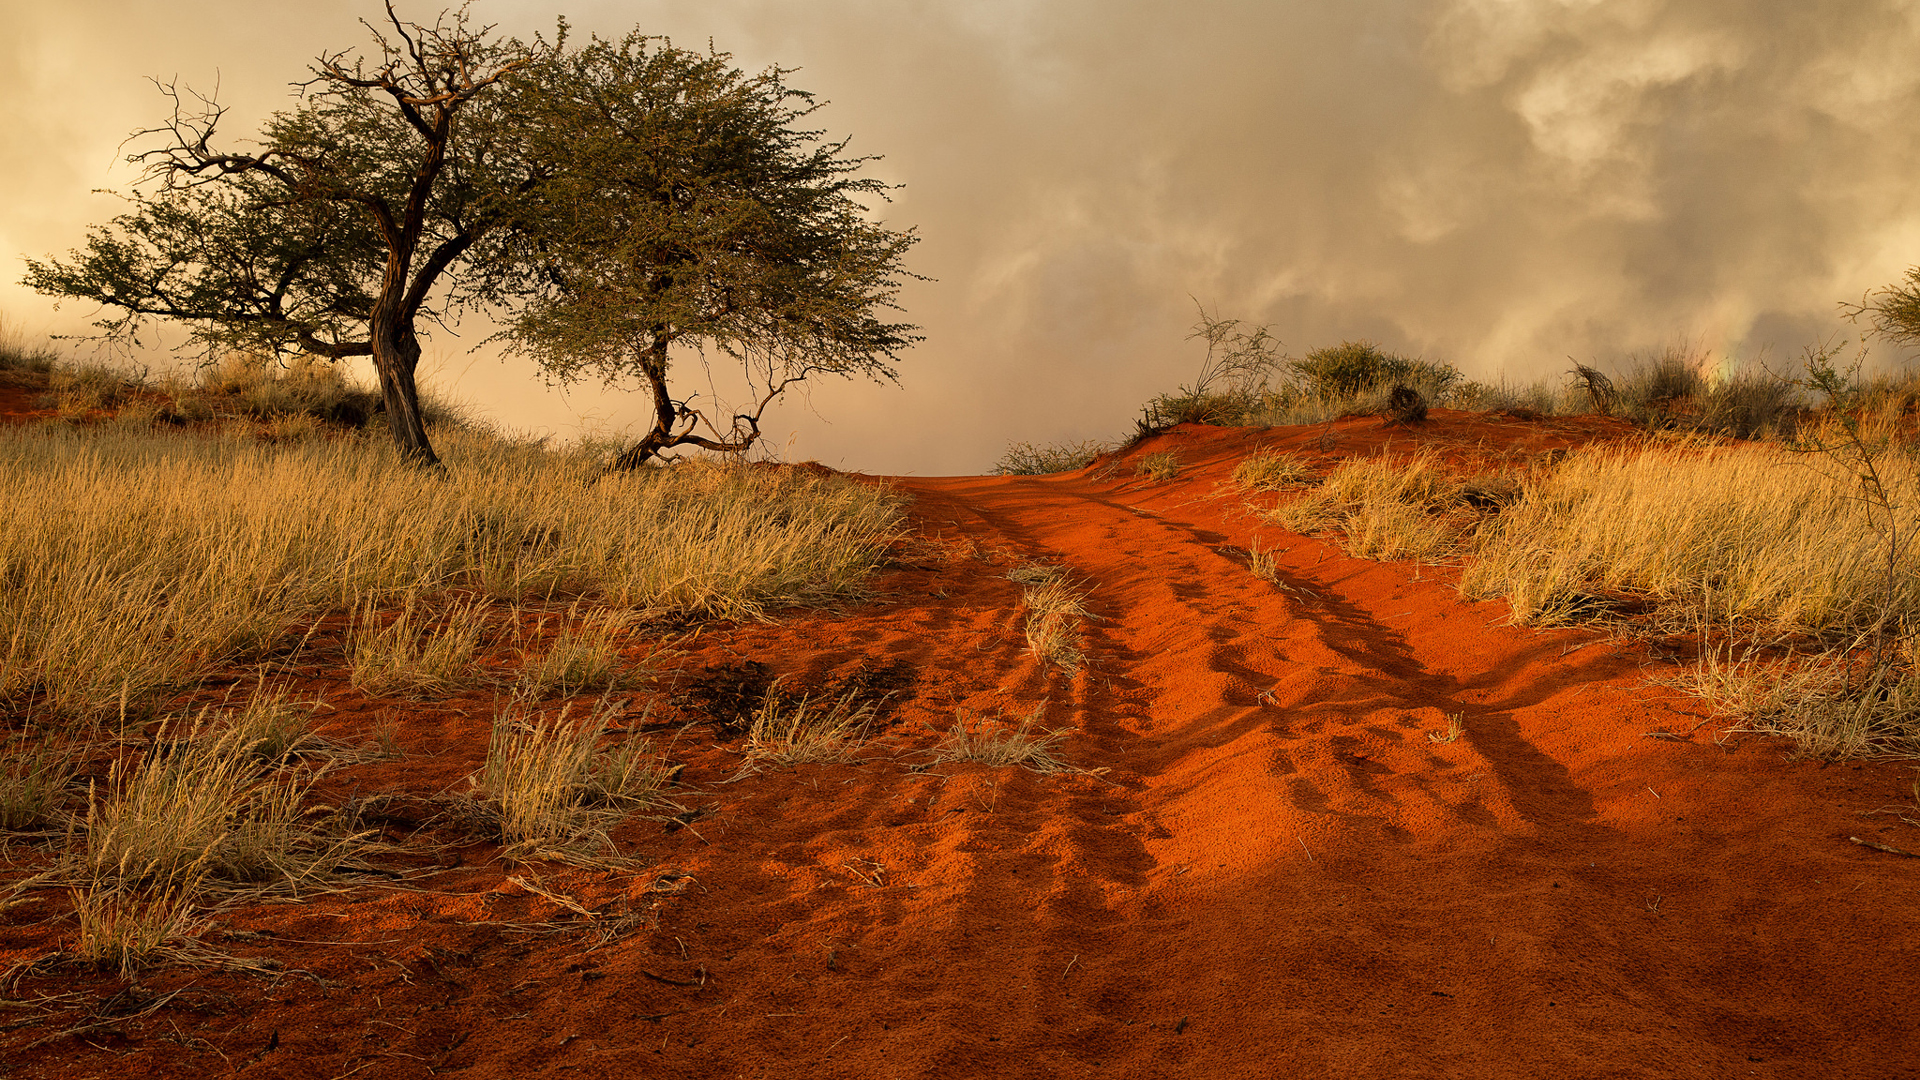 Red Sand Between Dry Grass Field Tree With Sunbeam Under White Clouds Sky 2K Nature